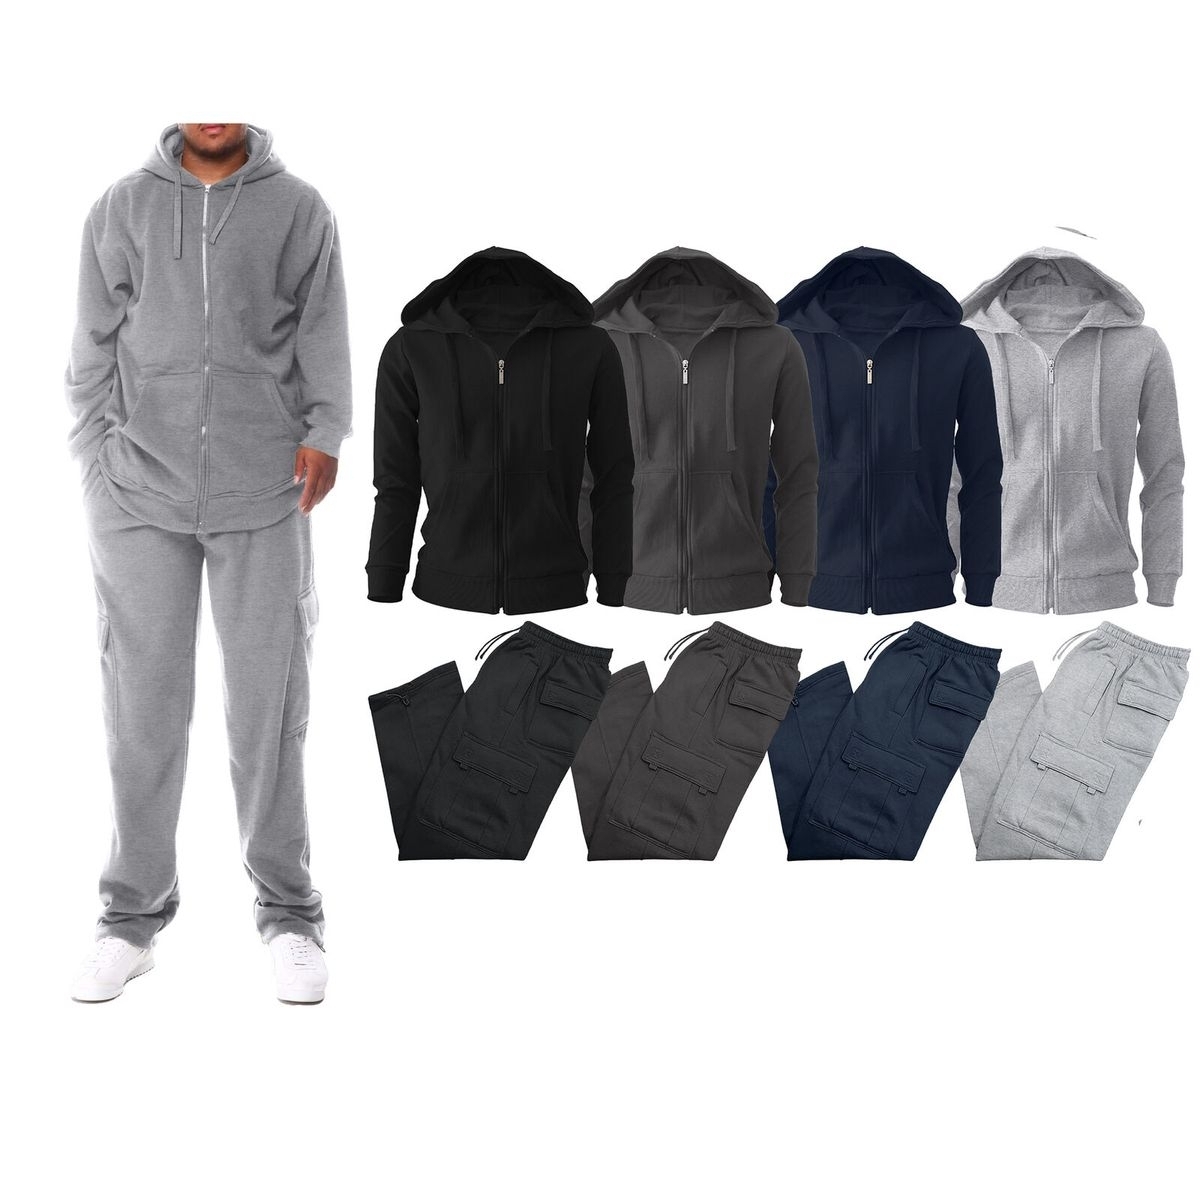 2-Pack: Men's Big & Tall Winter Warm Athletic Active Cozy Fleece Lined Multi-Pocket Full Zip Up Cargo Tracksuit - Grey, X-large